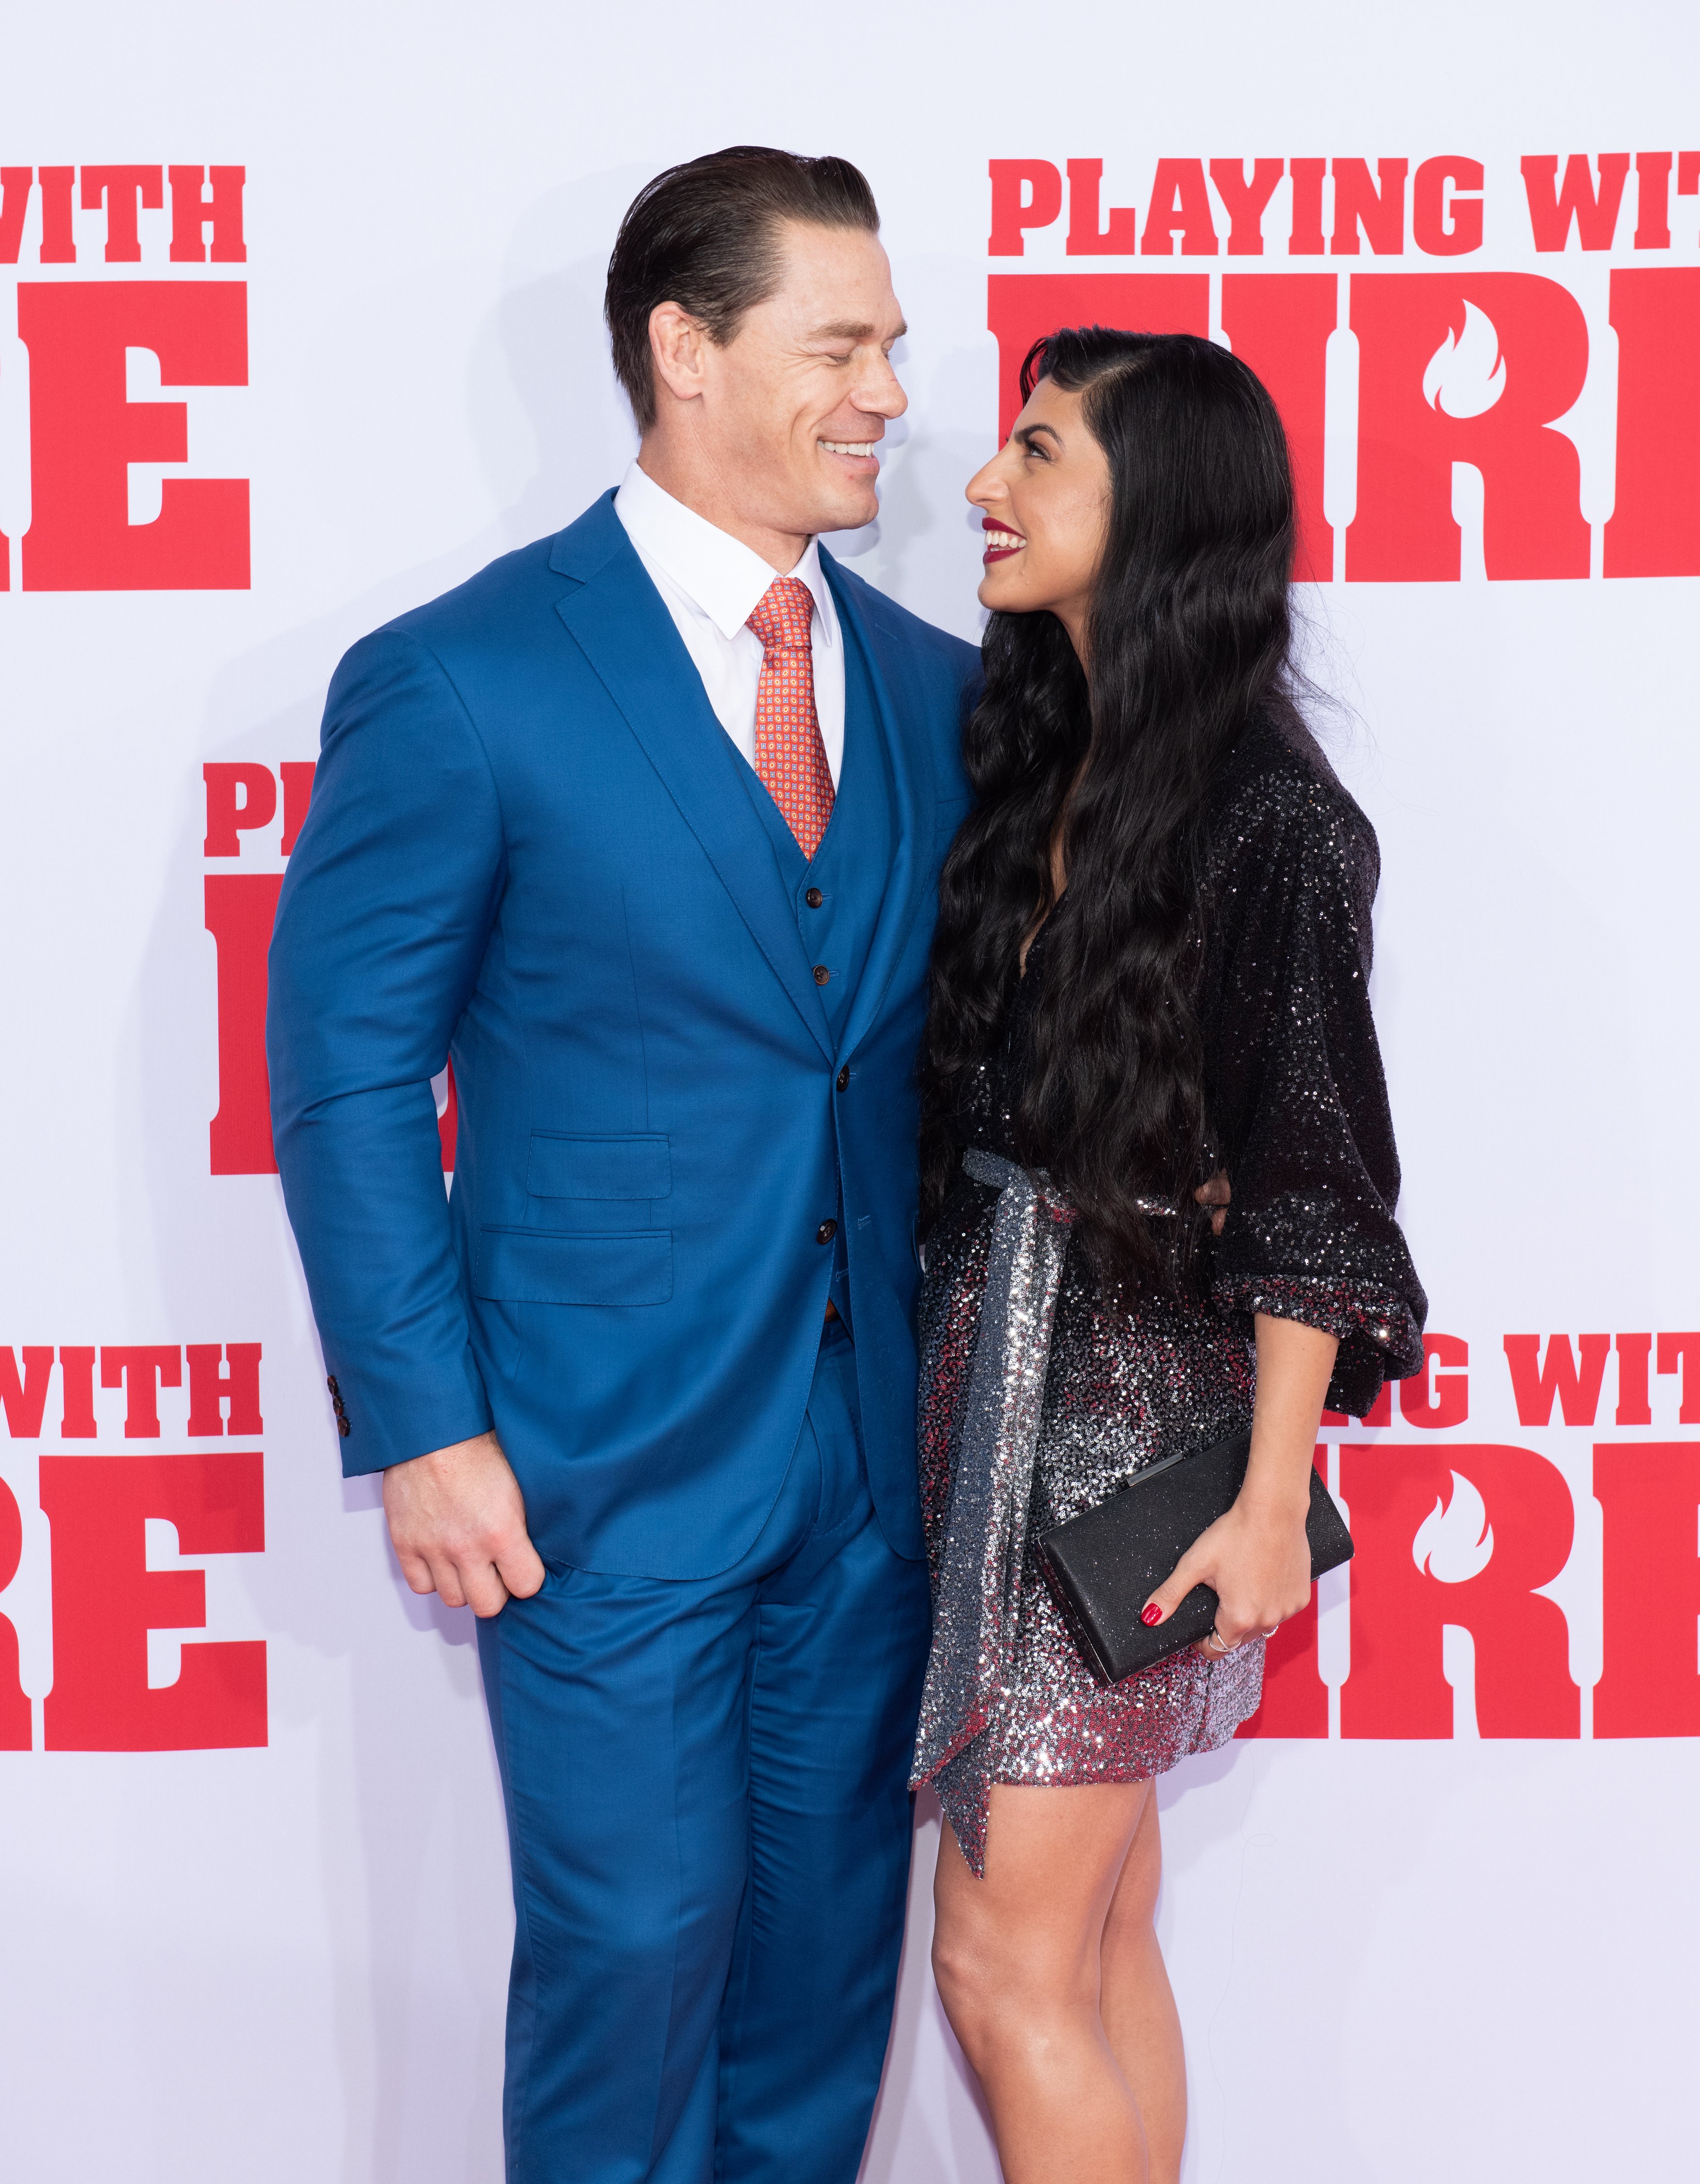 John Cena and girlfriend Shay Shariatzadeh attend the "Playing With Fire" New York premiere on October 26, 2019, in New York City. | Source: Getty Images.